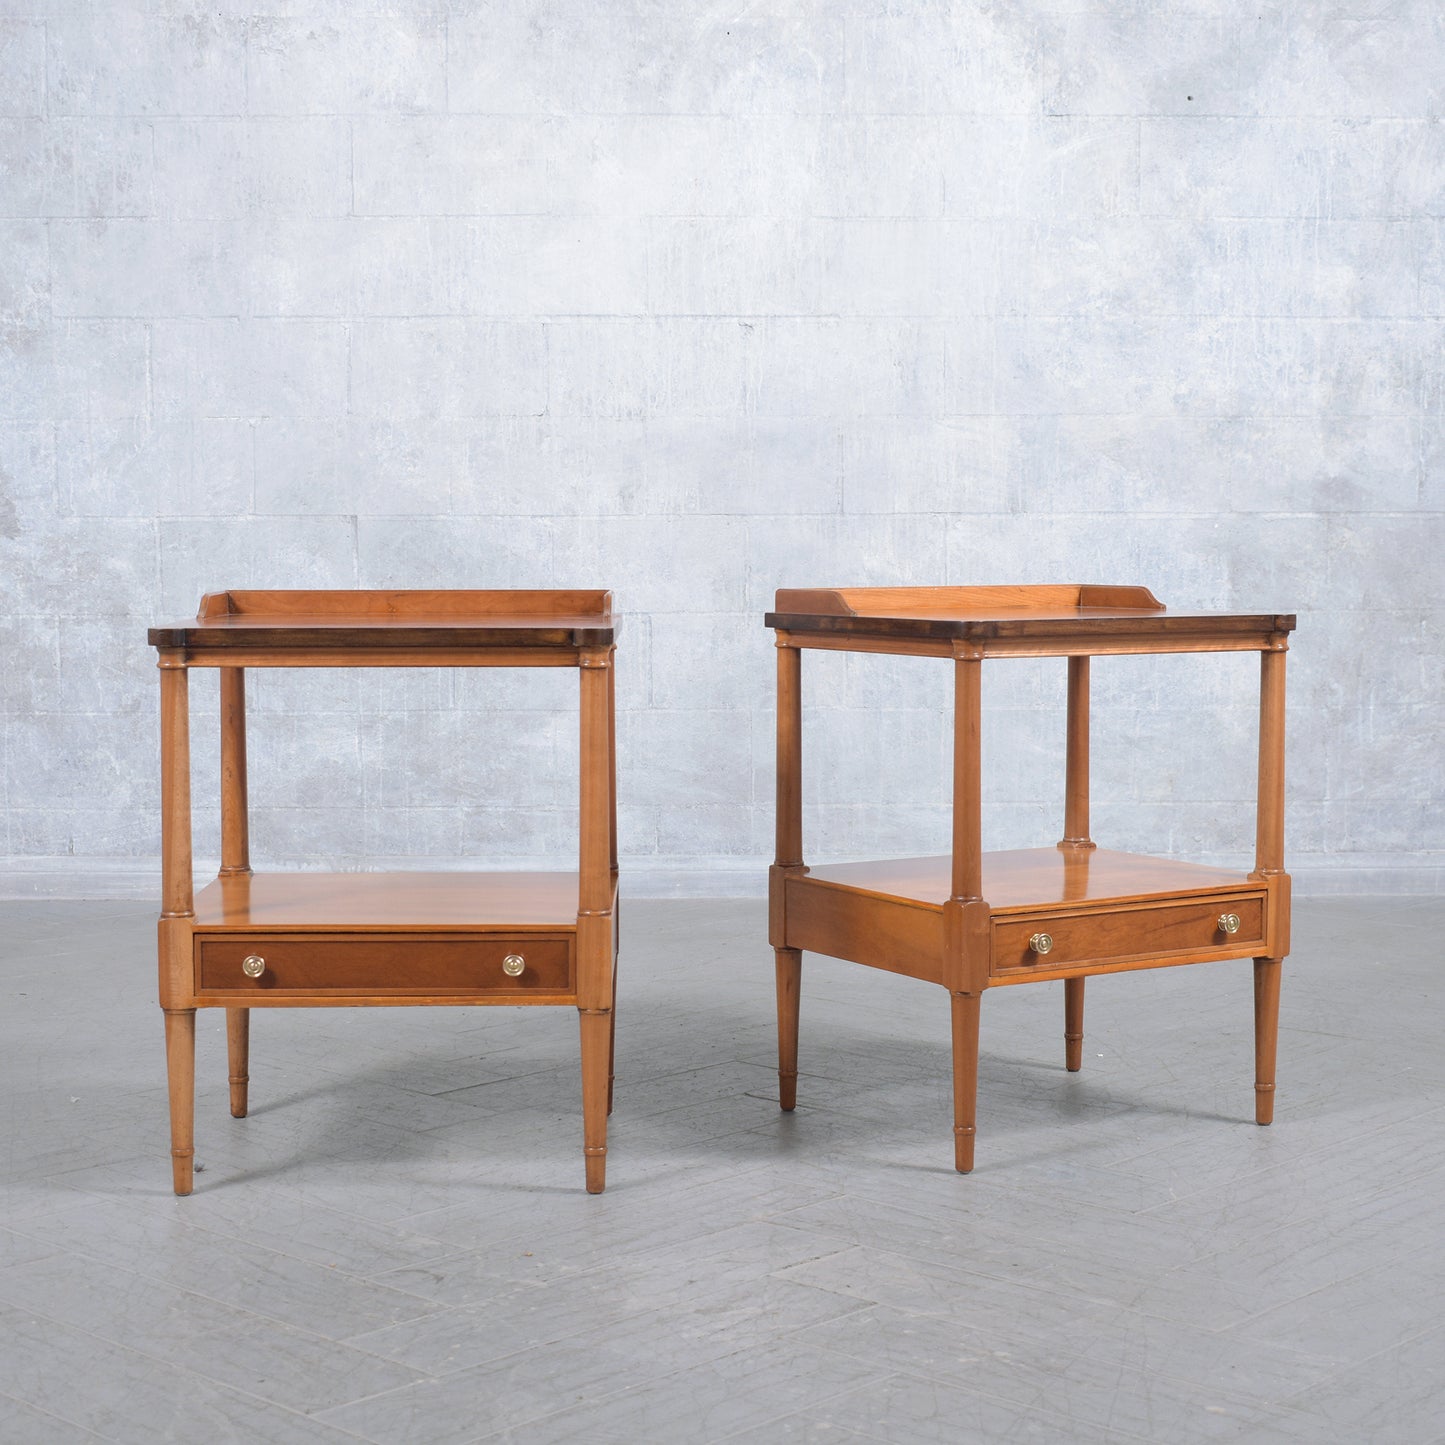 Elegant Handcrafted Maple Bedside Tables with Brass Handles and Tapered Legs